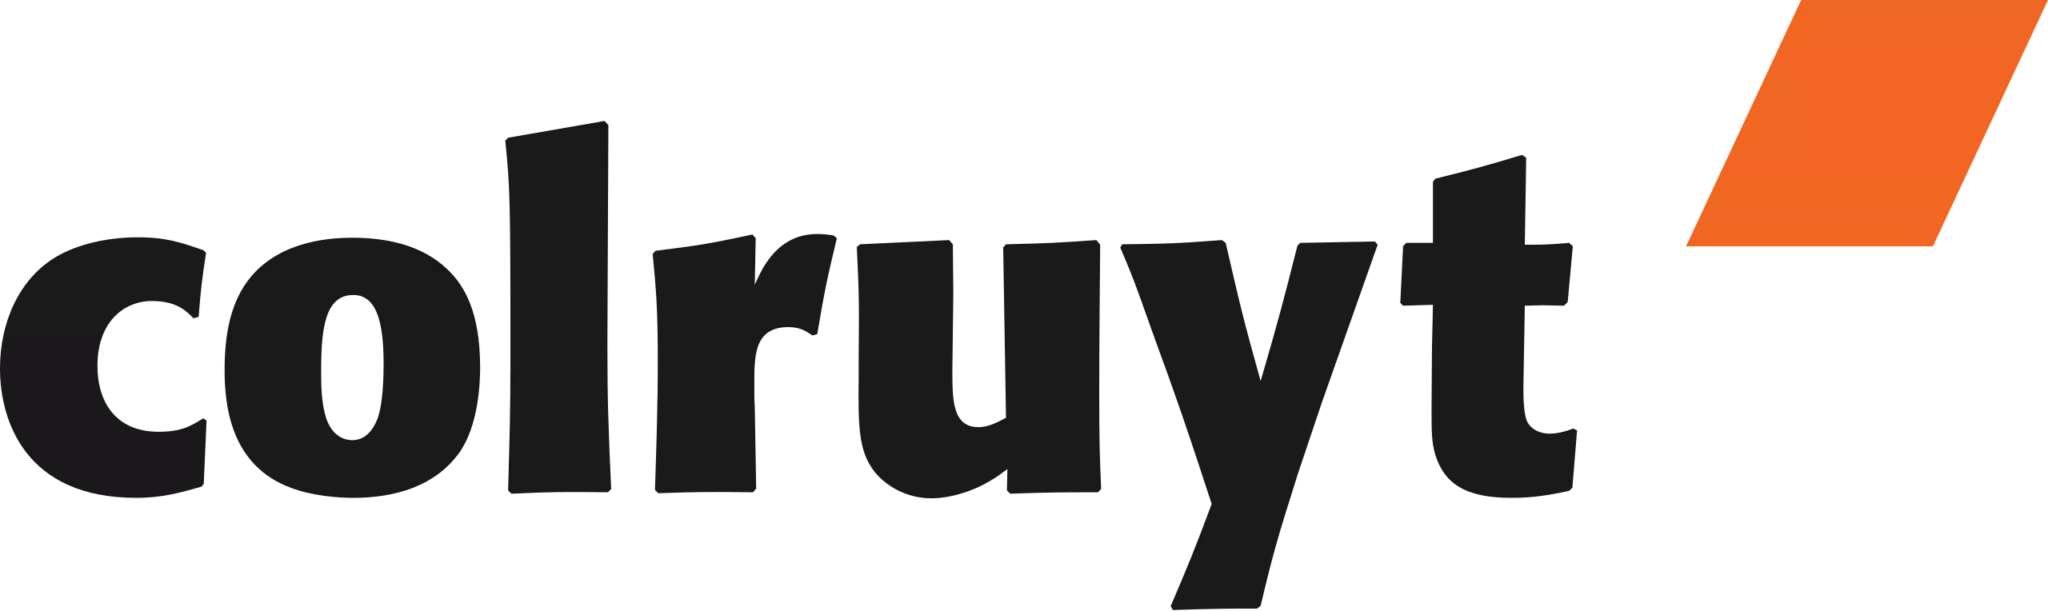 Clients like Colruyt worked with the House of Marketing